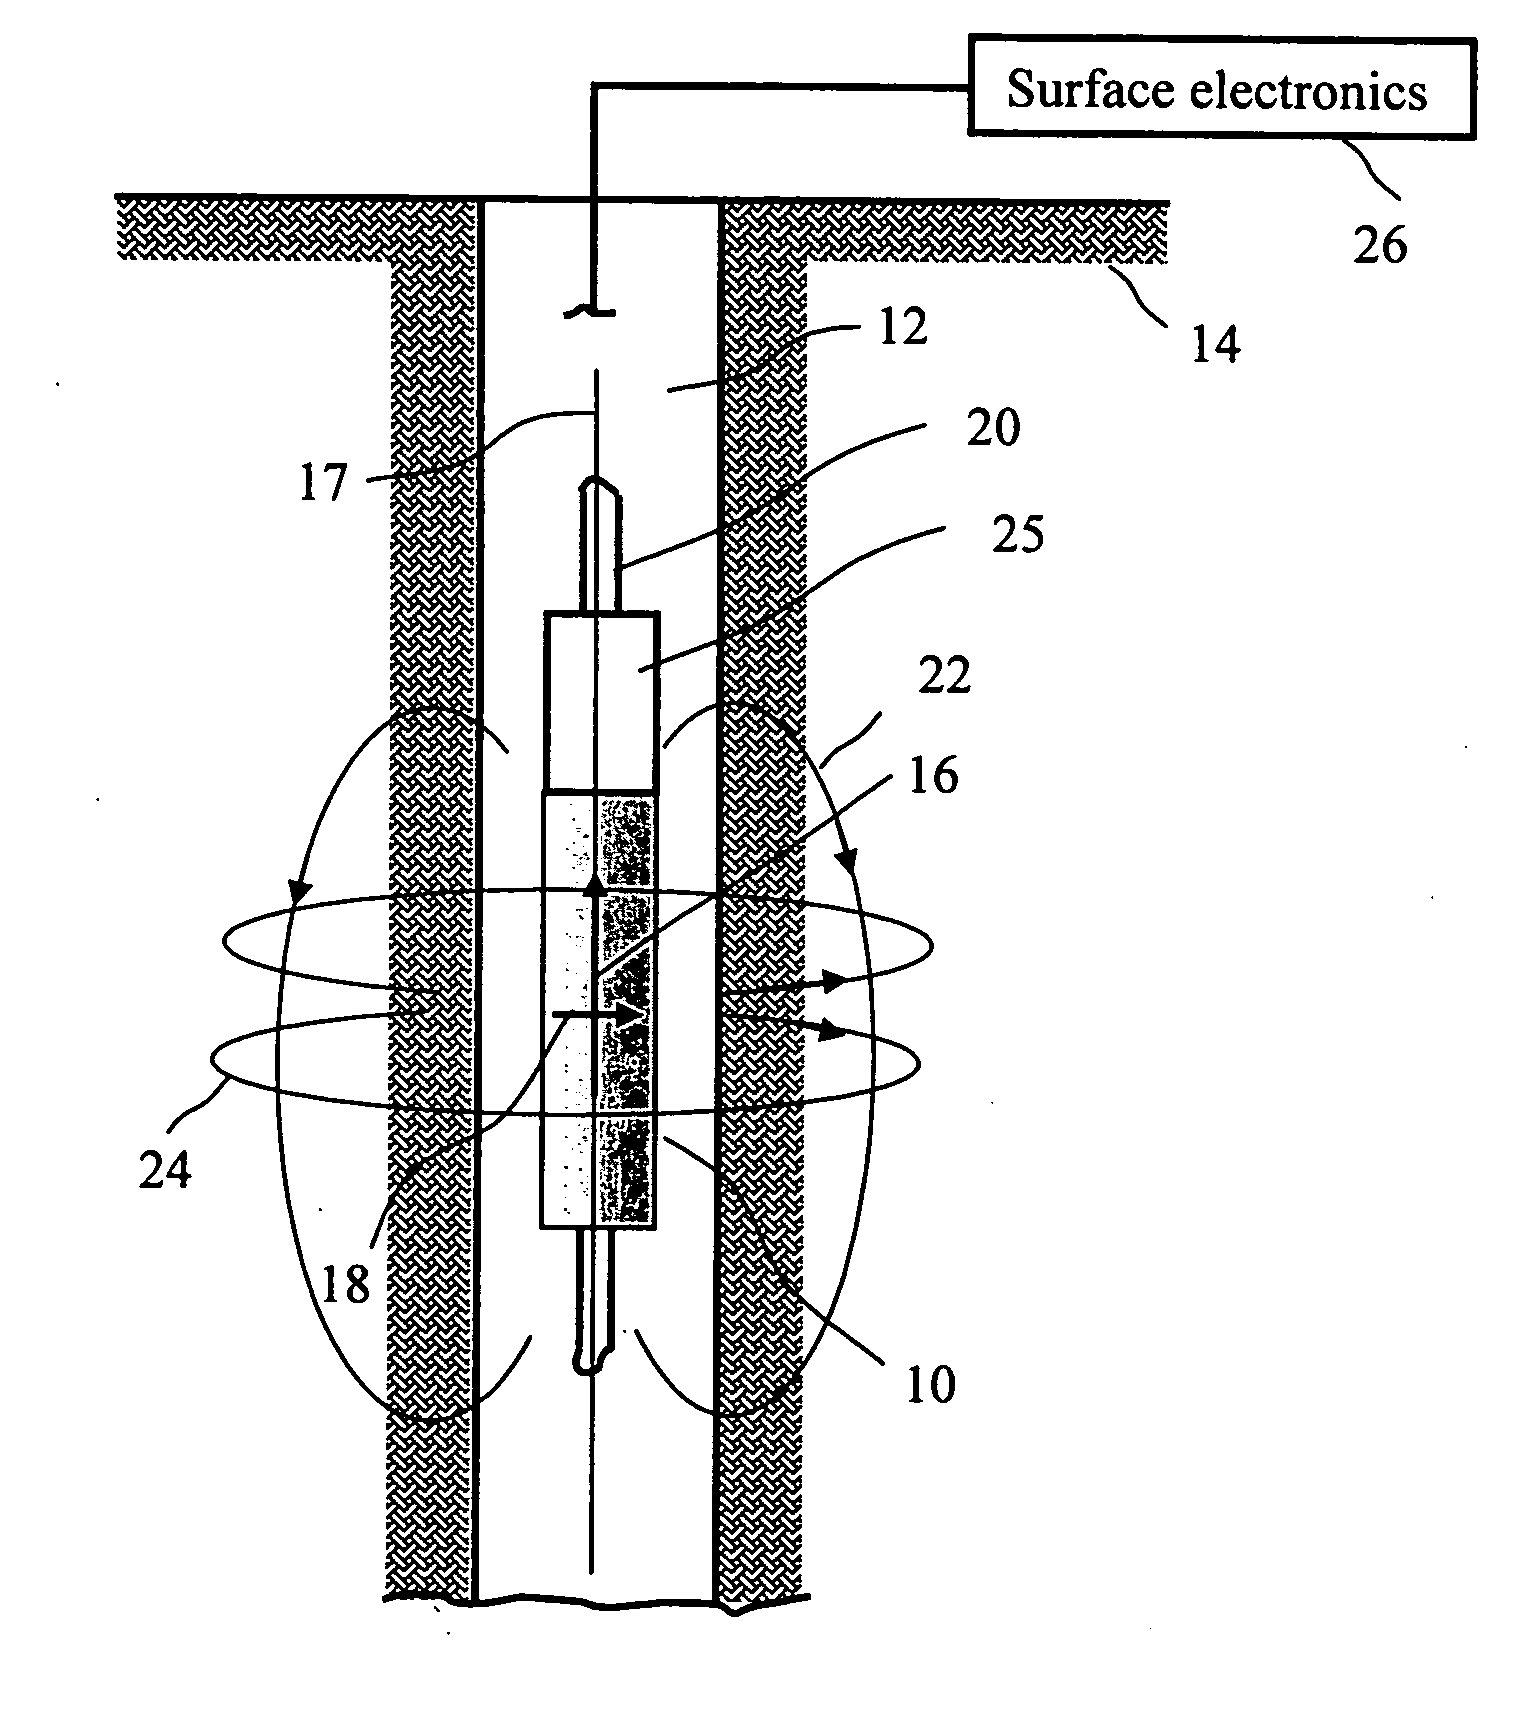 Nuclear magnetic resonance tool using switchable source of static magnetic field